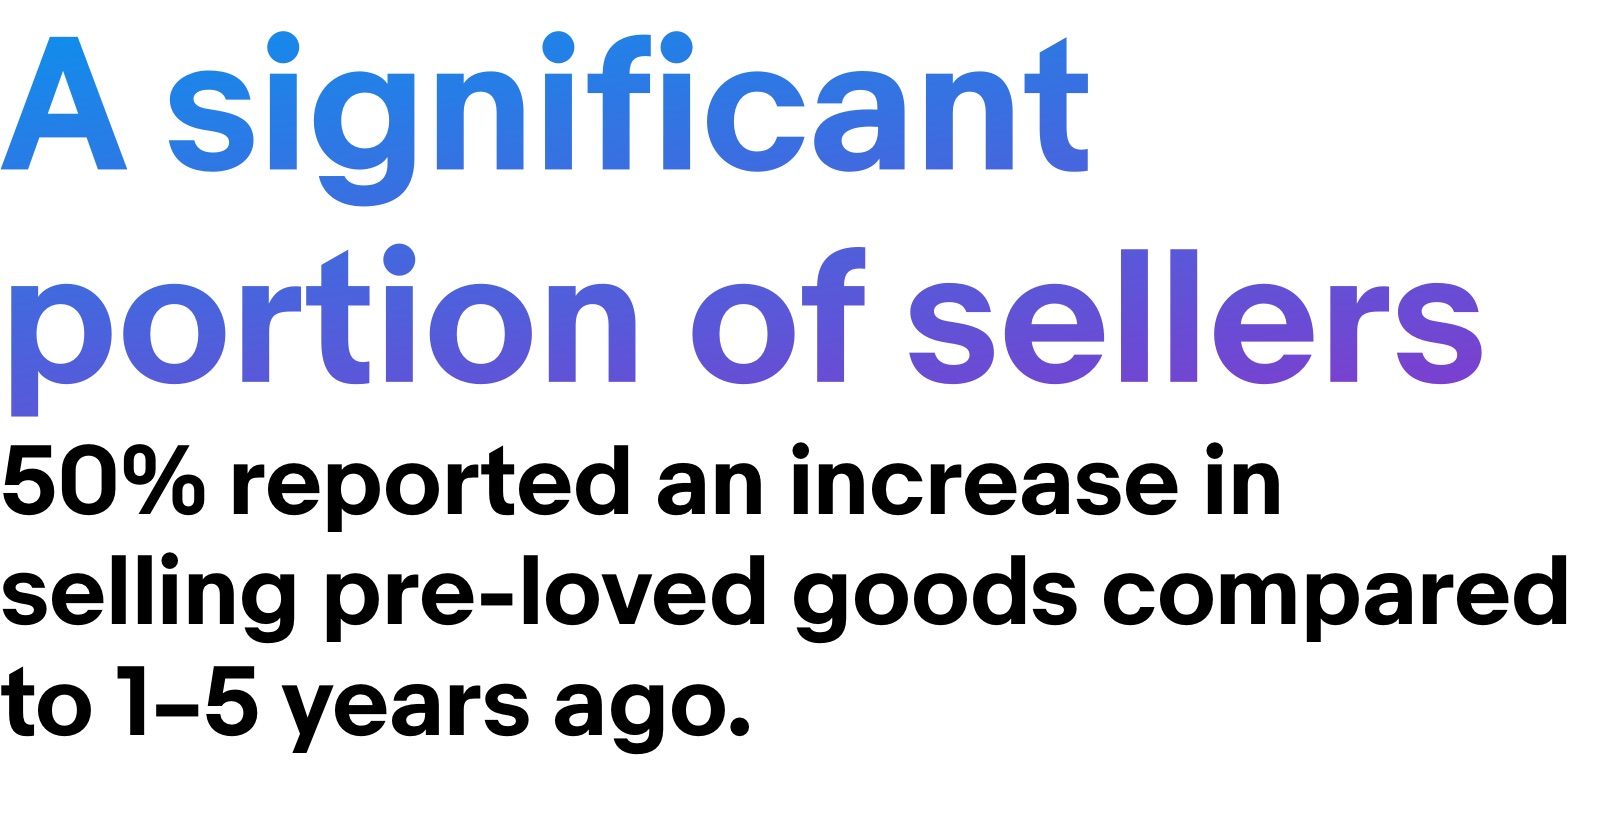 A significant portion of sellers 50% reported an increase in selling pre-loved goods compared to 1-5 years ago.